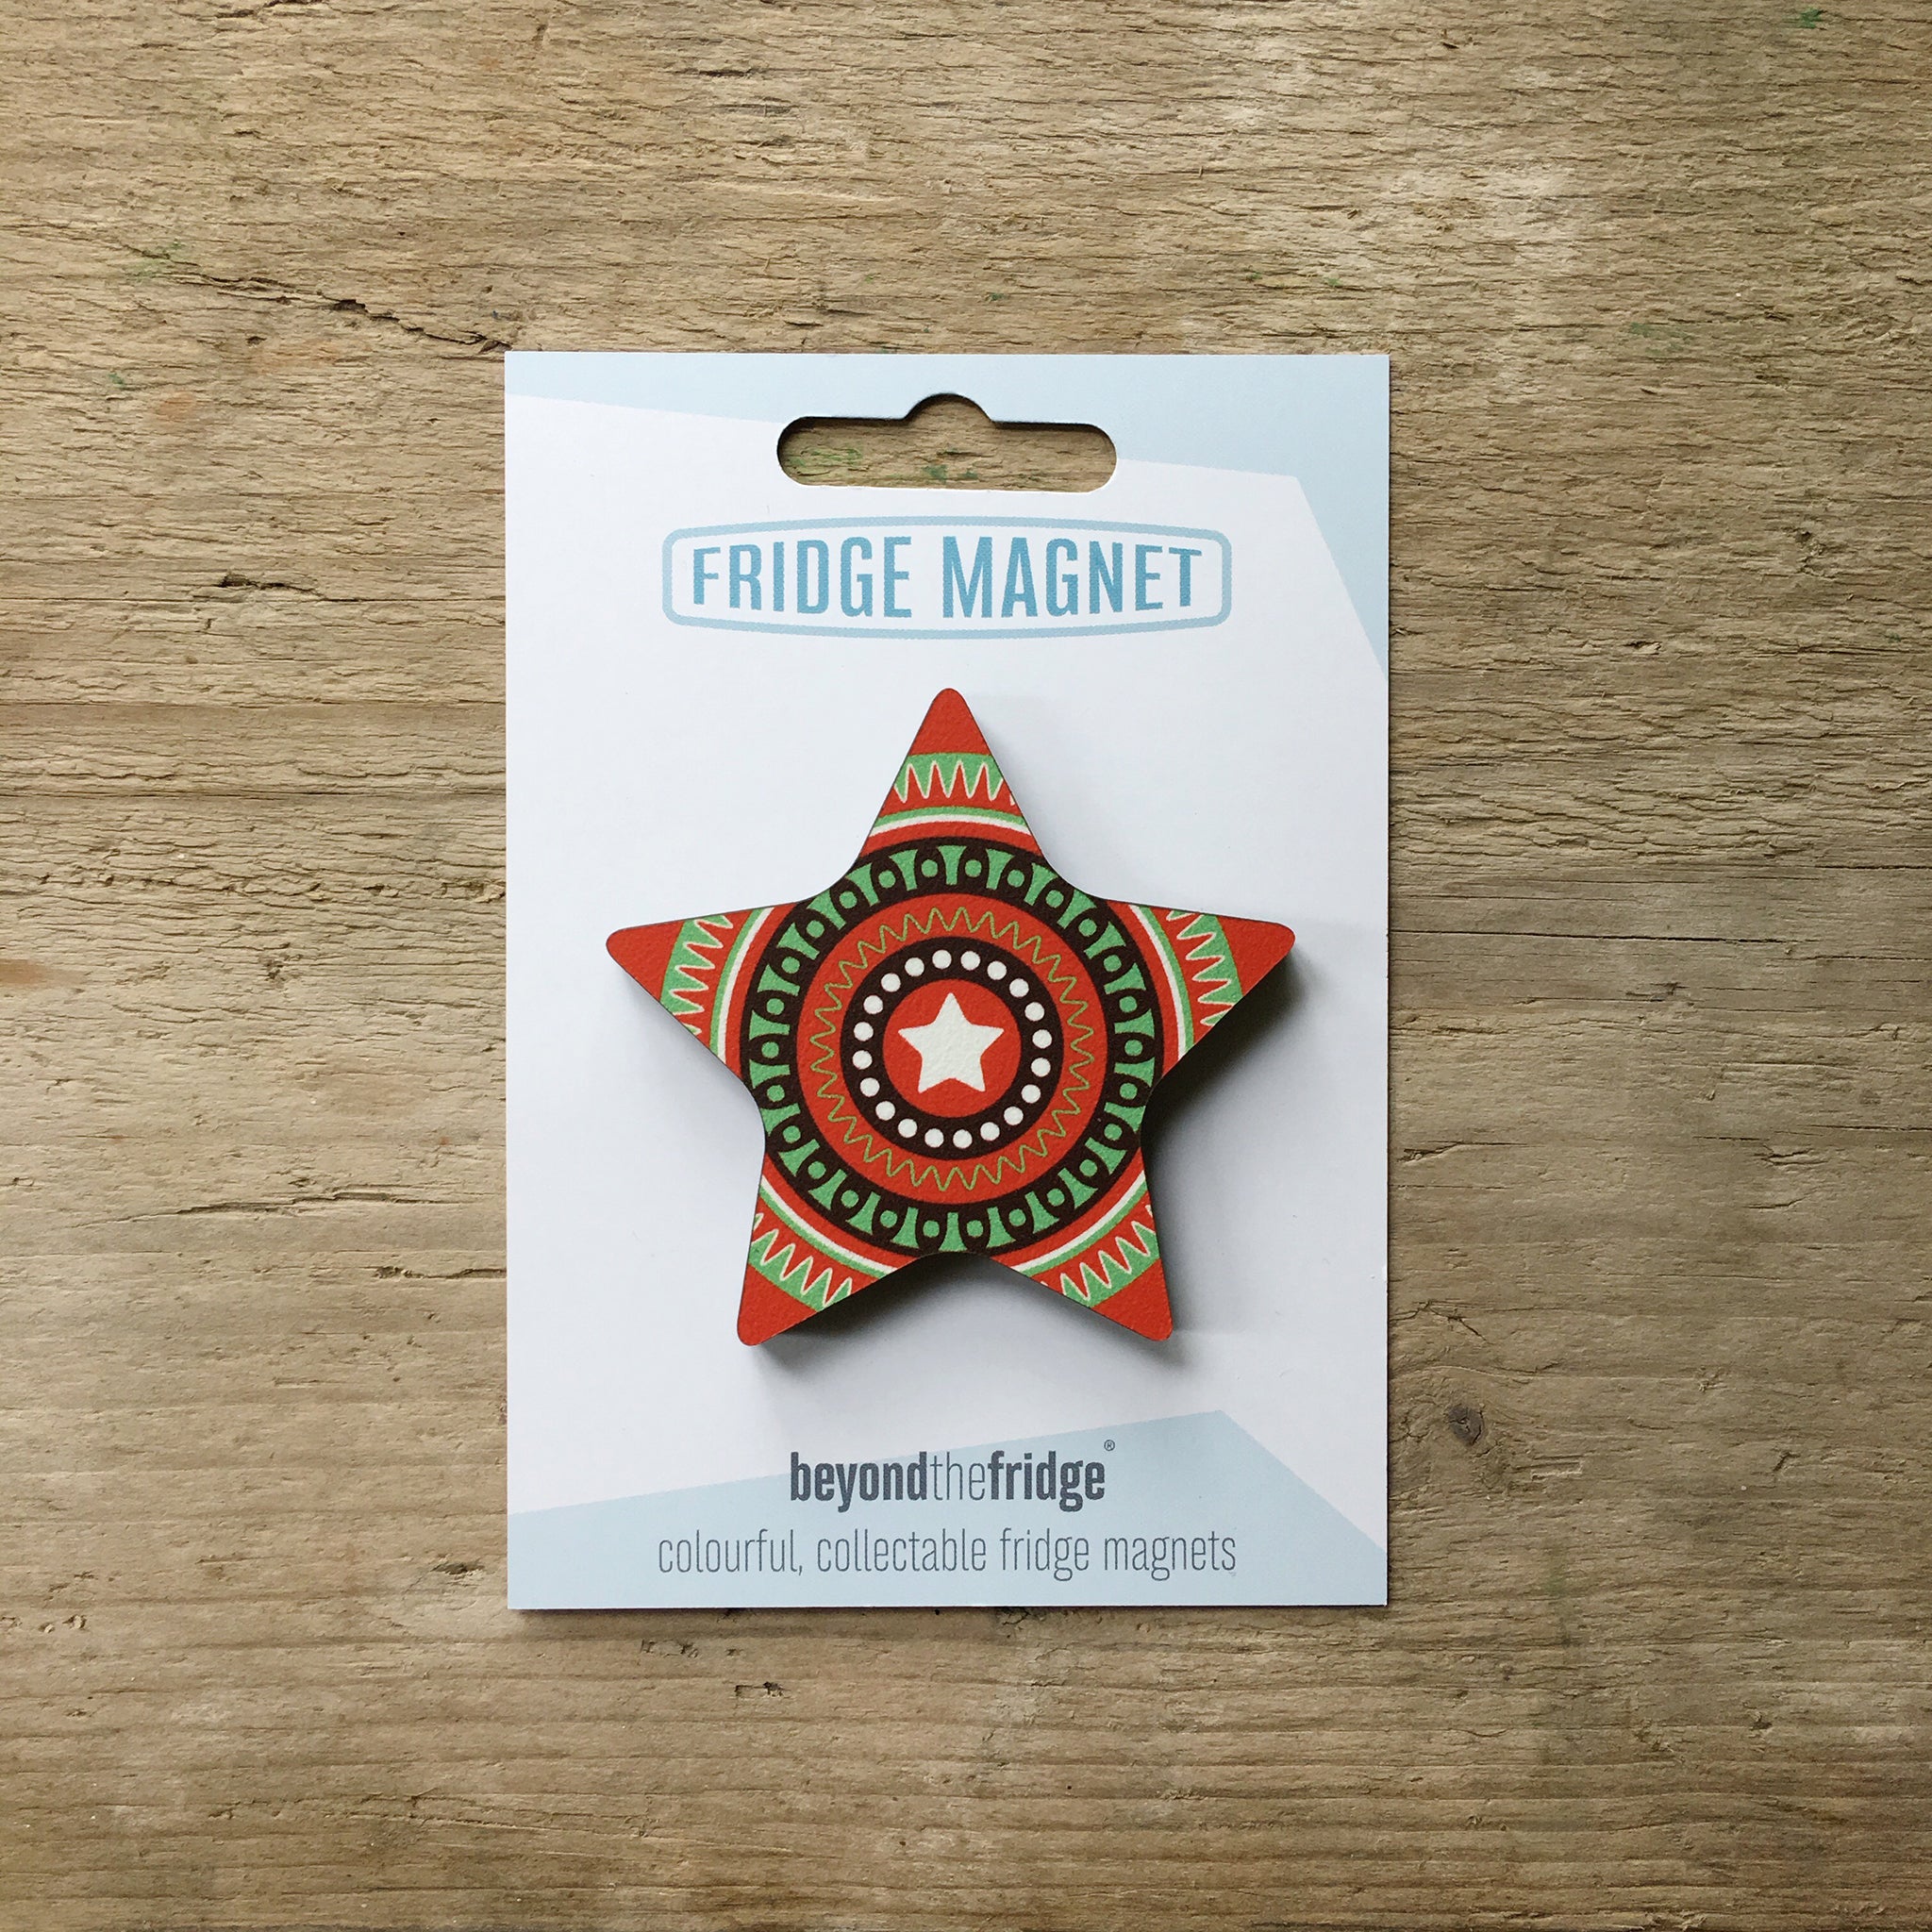 A red star design plywood fridge magnet by Beyond the Fridge in it’s pack on a wooden background